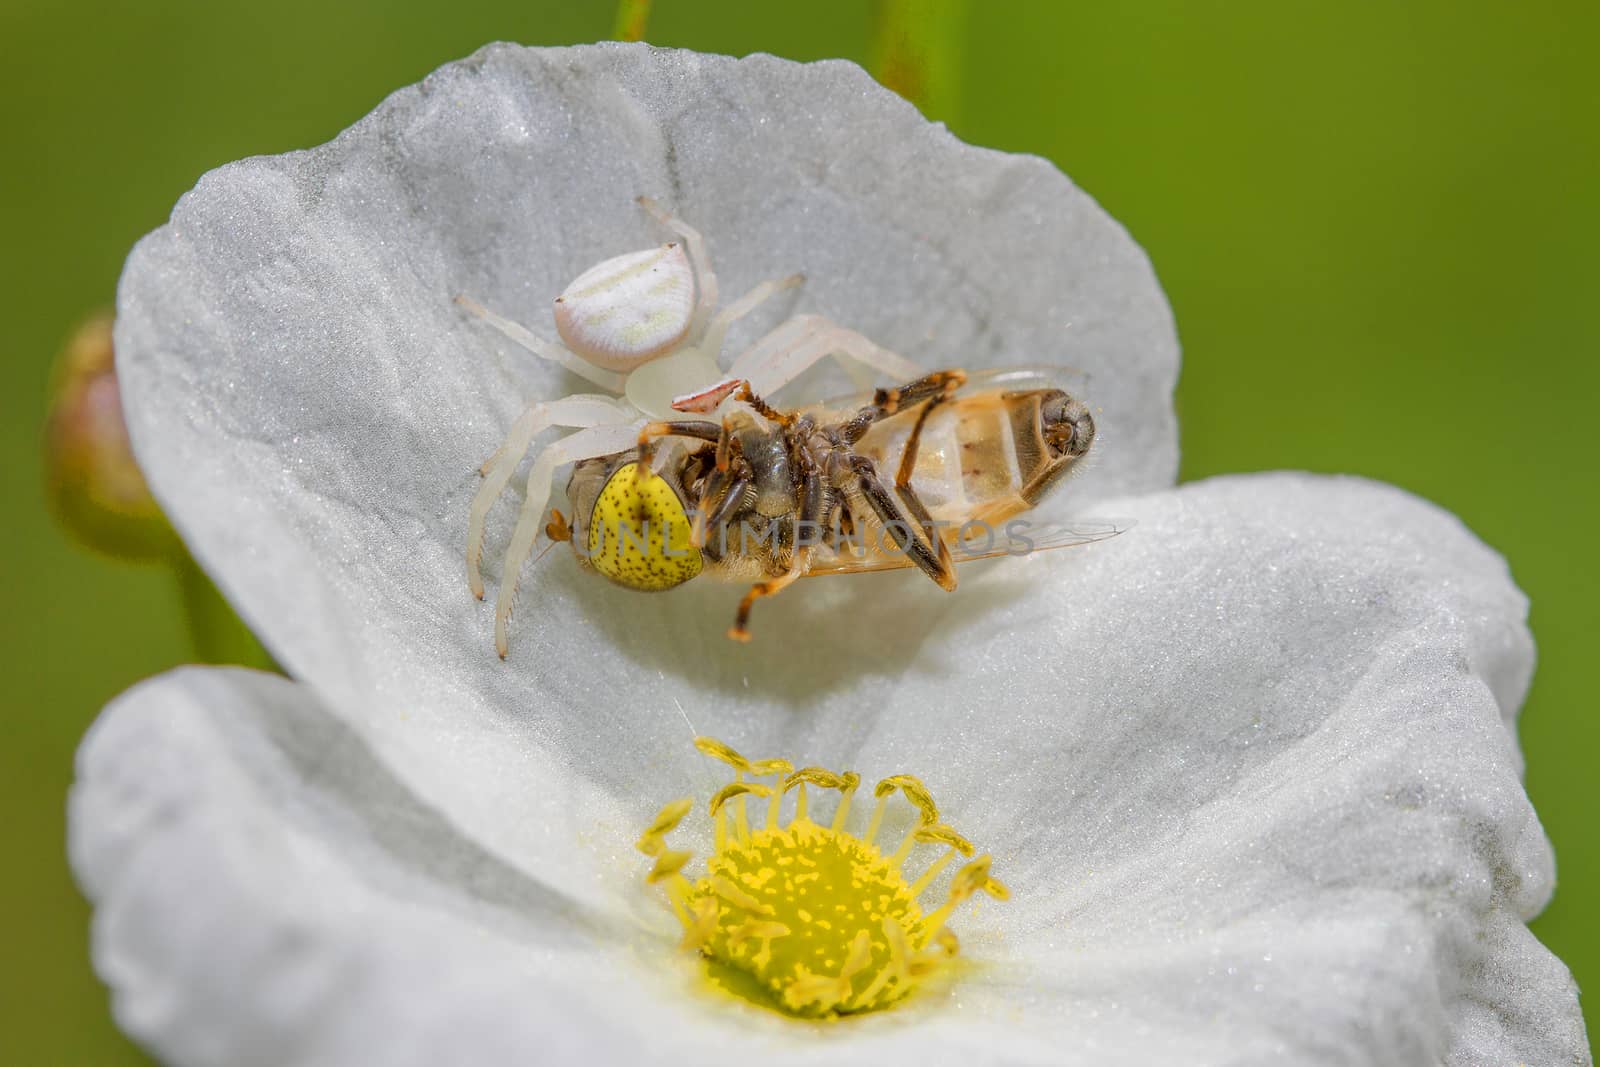 The white spider catches the bait on white flowers. by TakerWalker